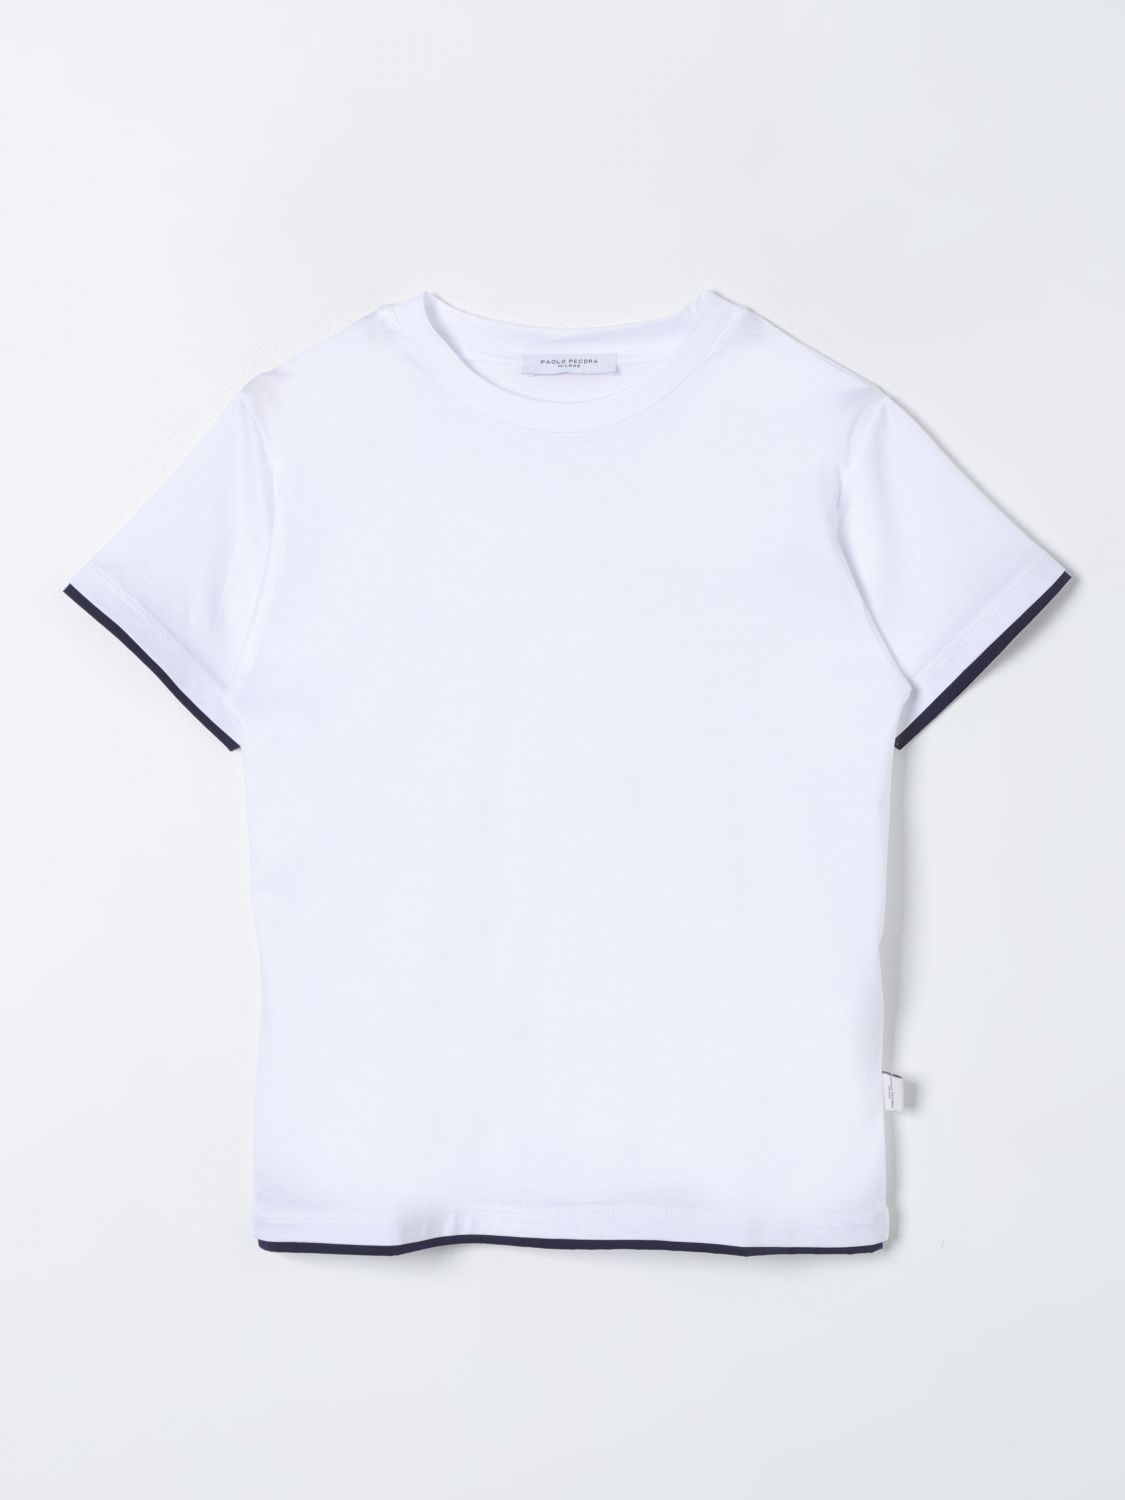 Paolo Pecora T-shirt  Kids Color White In 白色